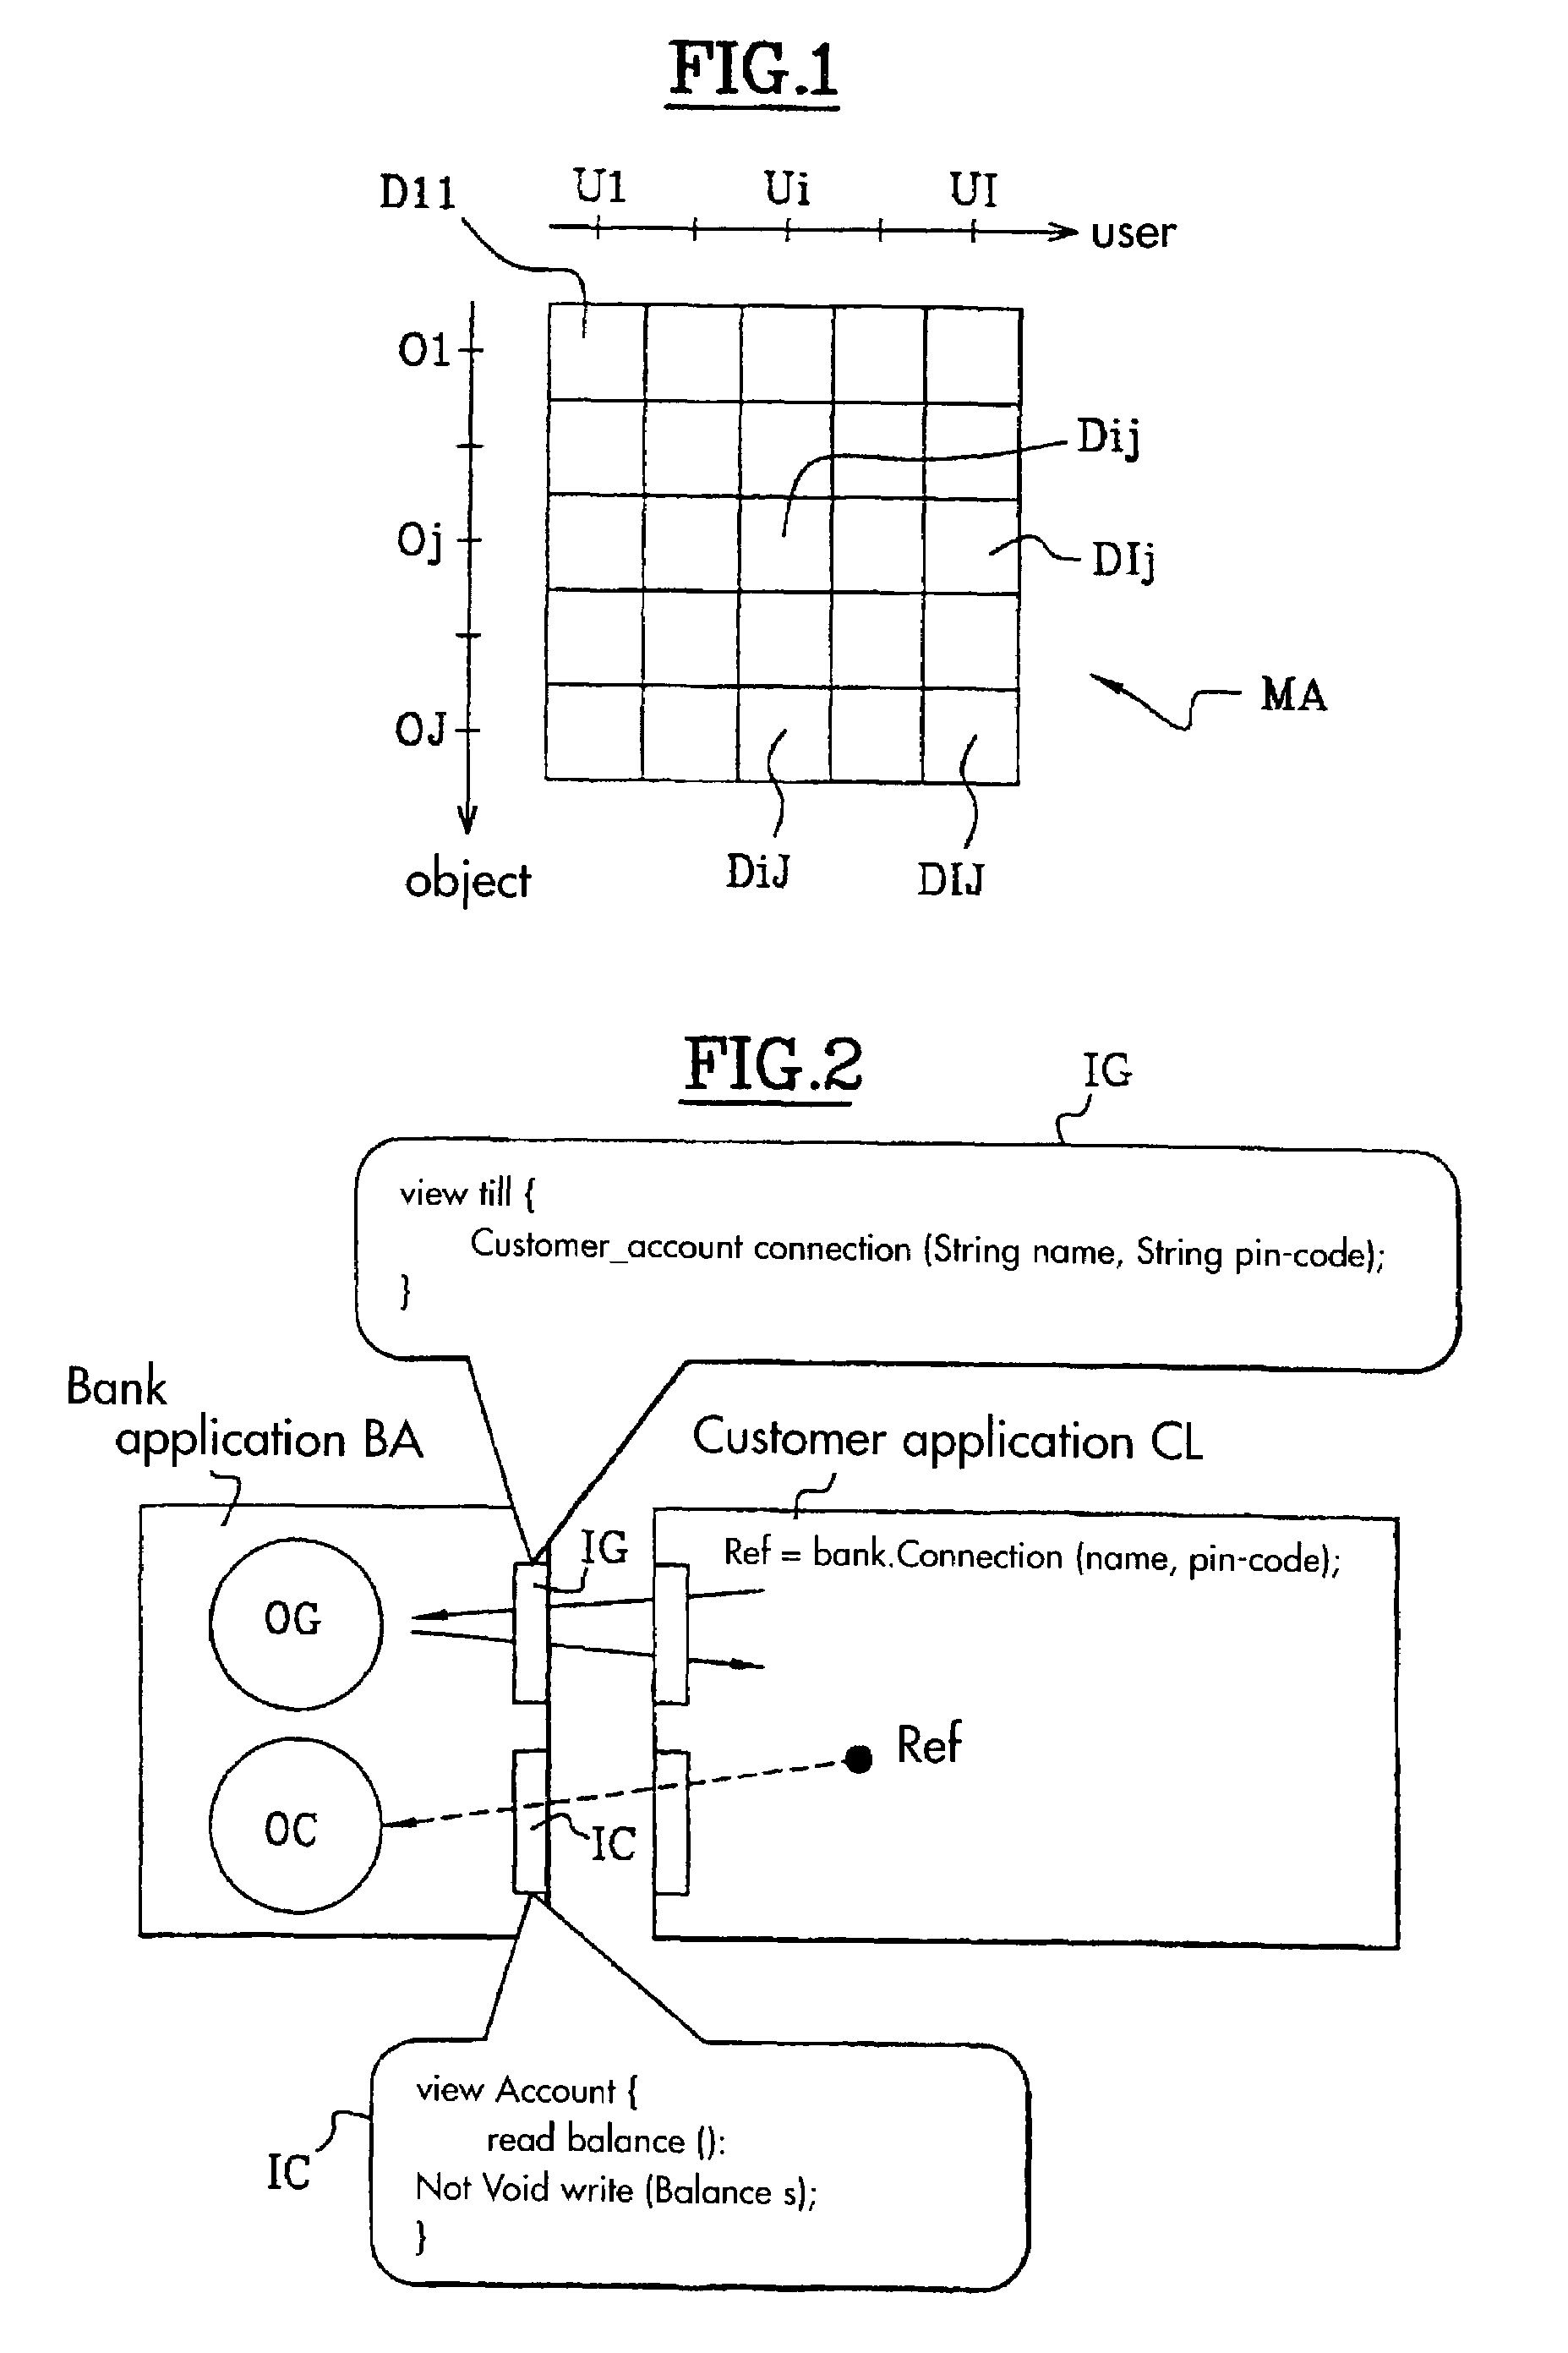 Capability-based access control for applications in particular co-operating applications in a chip card